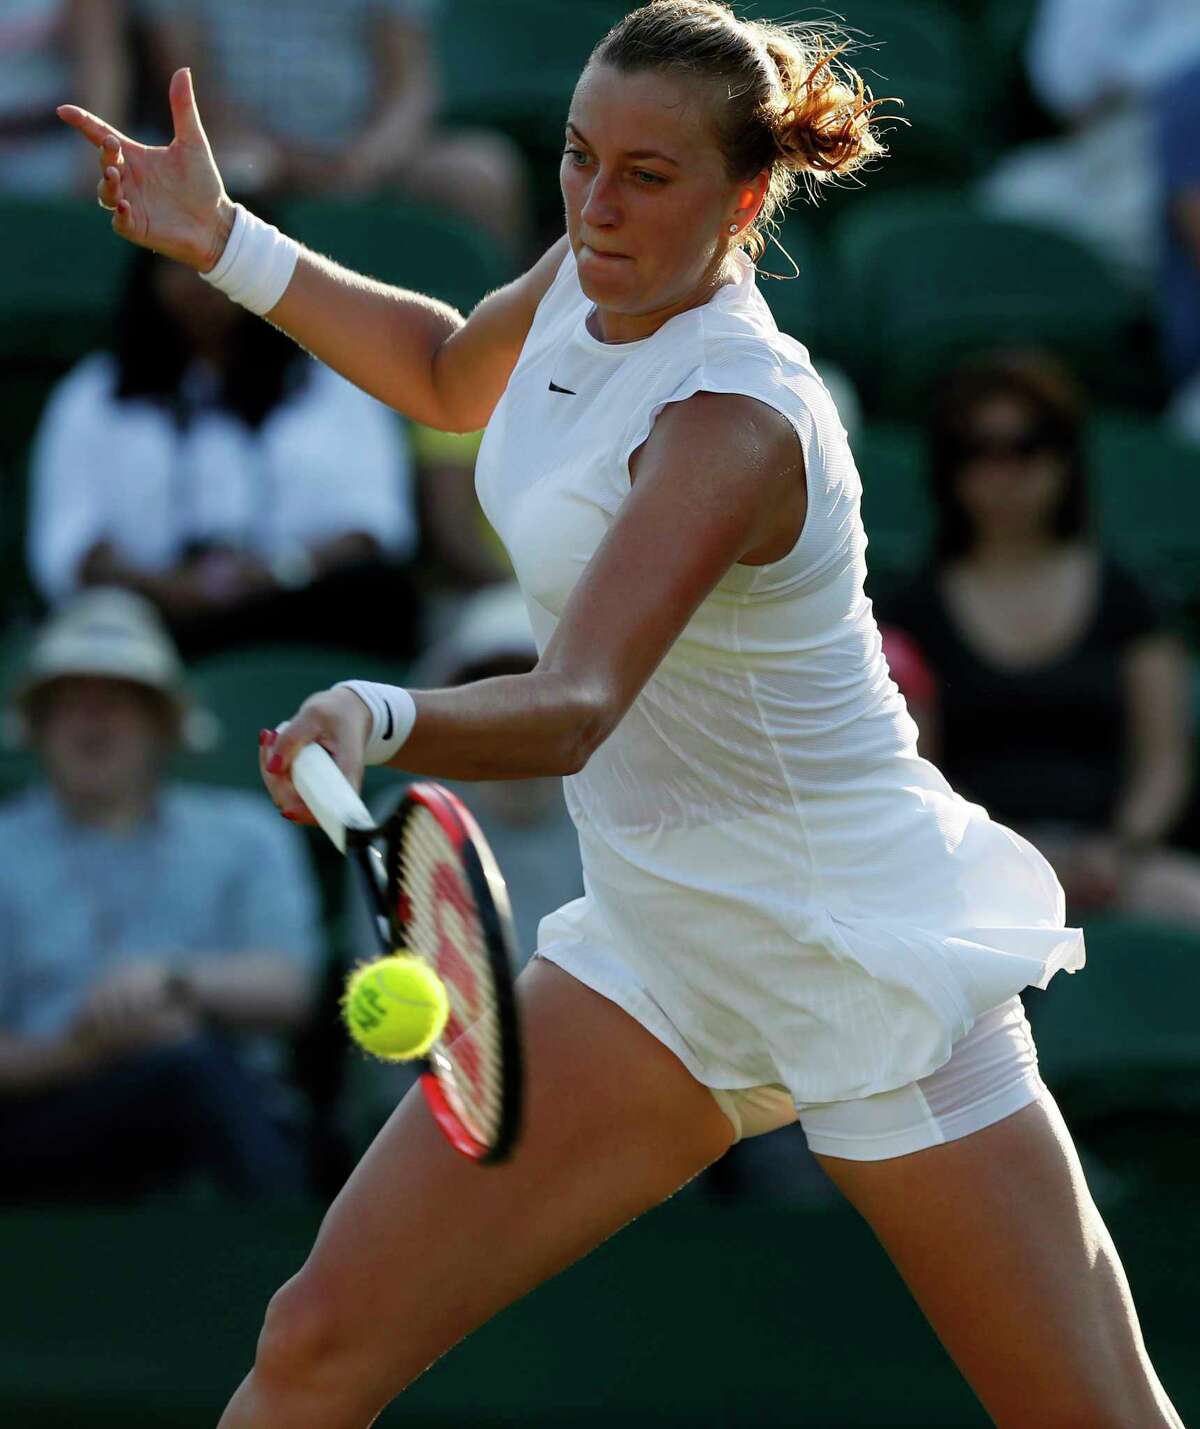 Czech Republic's Petra Kvitova returns to Madison Brengle of the United States during their Women's Single Match on day three at the Wimbledon Tennis Championships in London Wednesday, July 5, 2017. (AP Photo/Kirsty Wigglesworth)